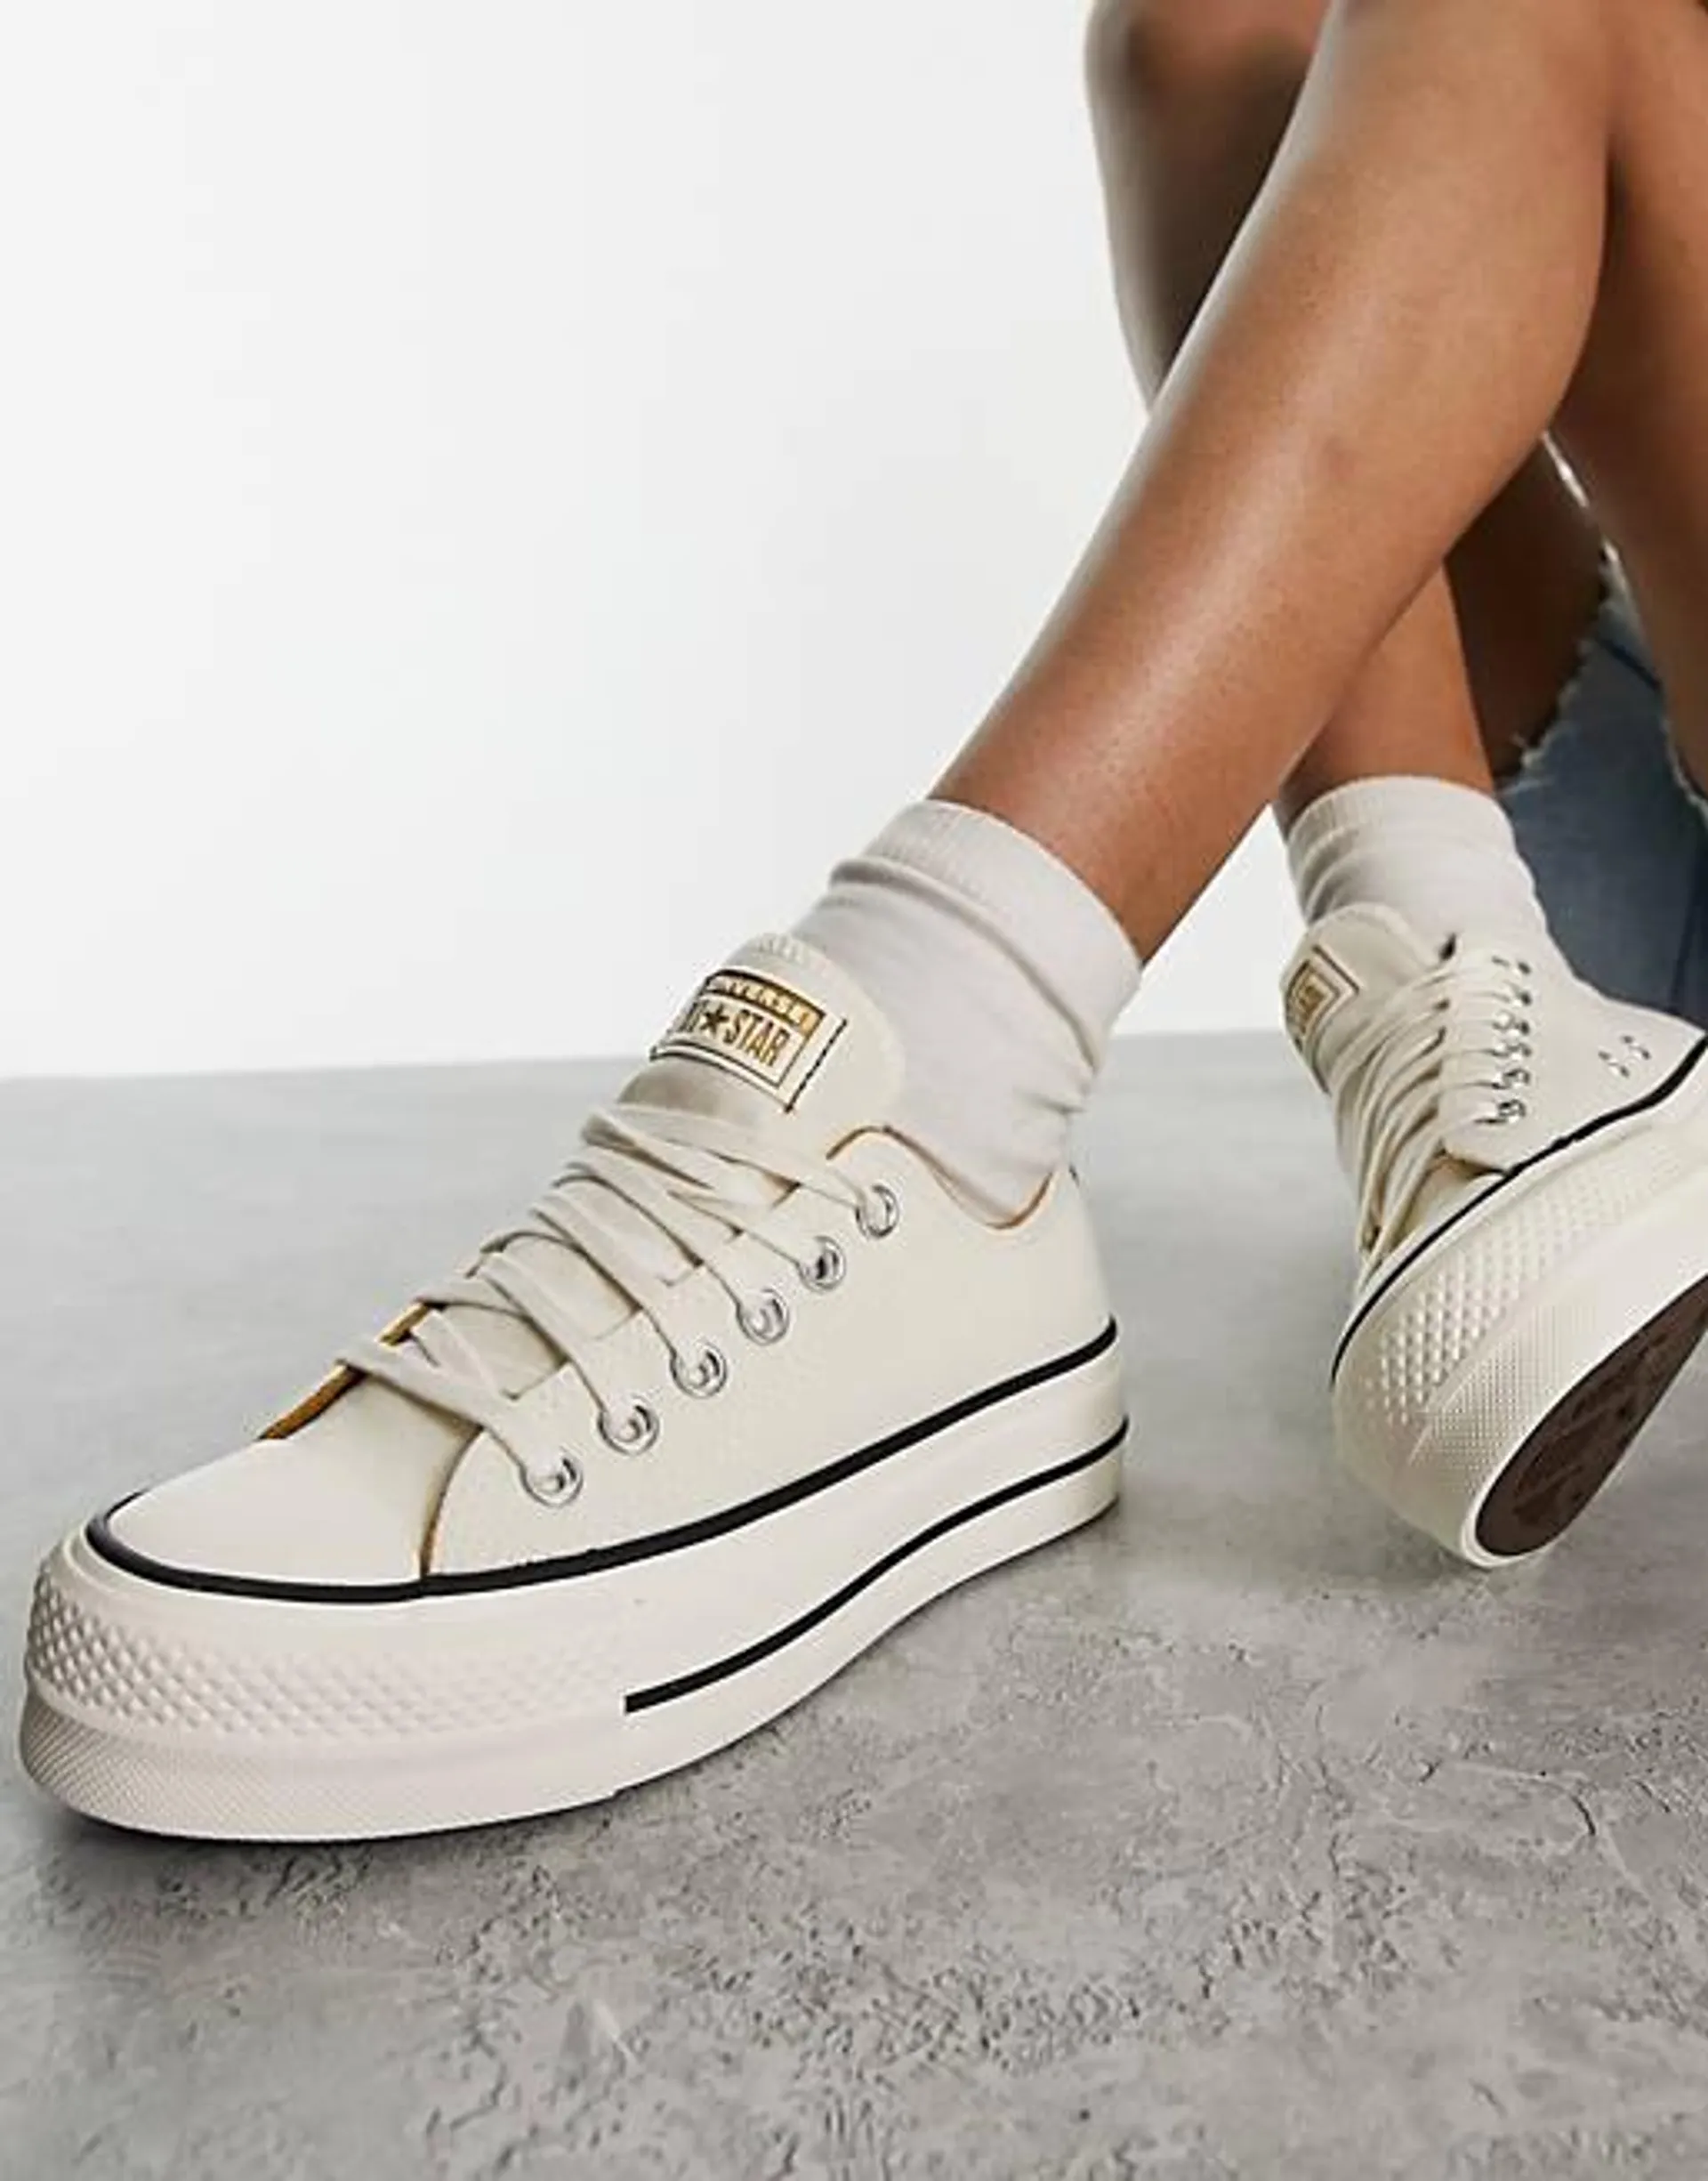 Converse Chuck Taylor All Star Lift Ox trainers in off white denim